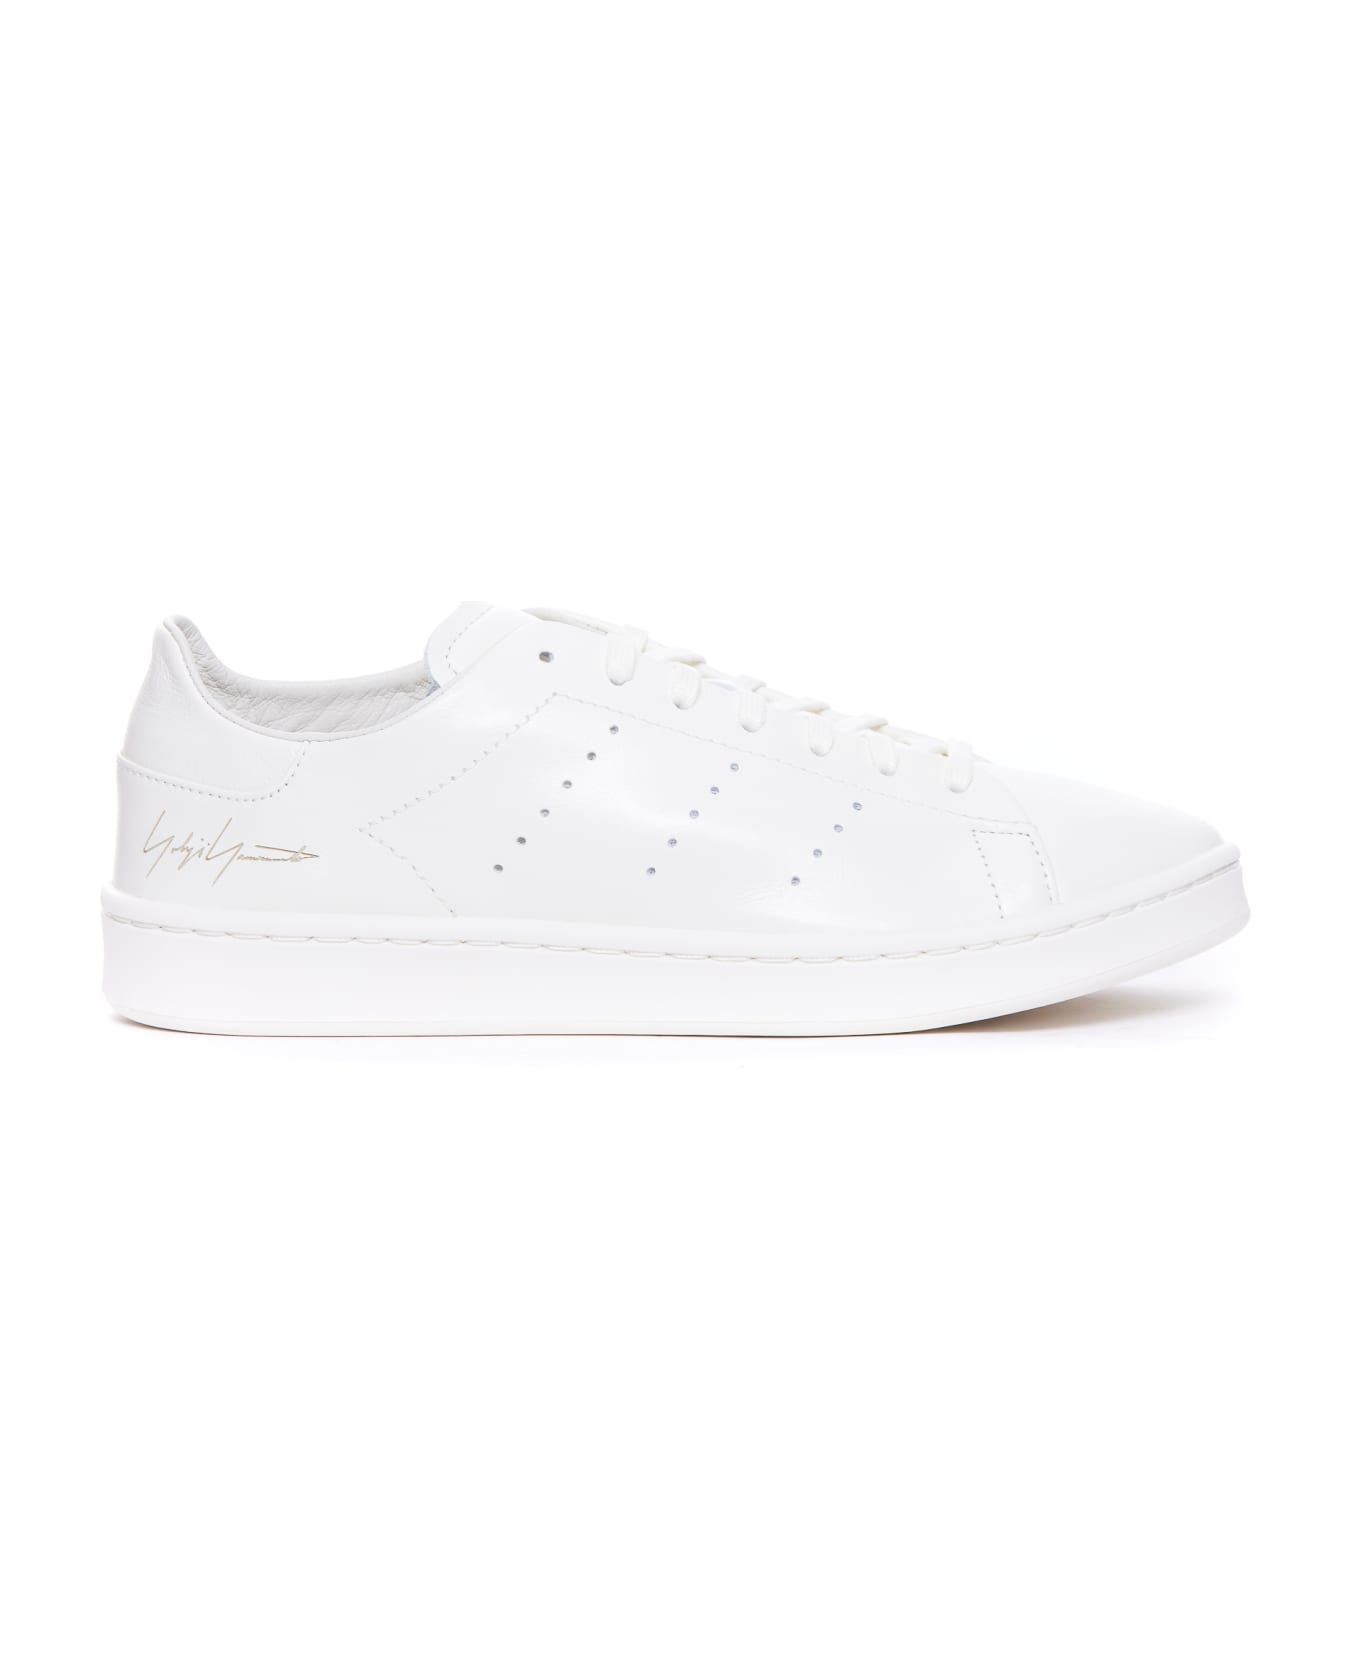 Y-3 Stan Smith Sneakers - White